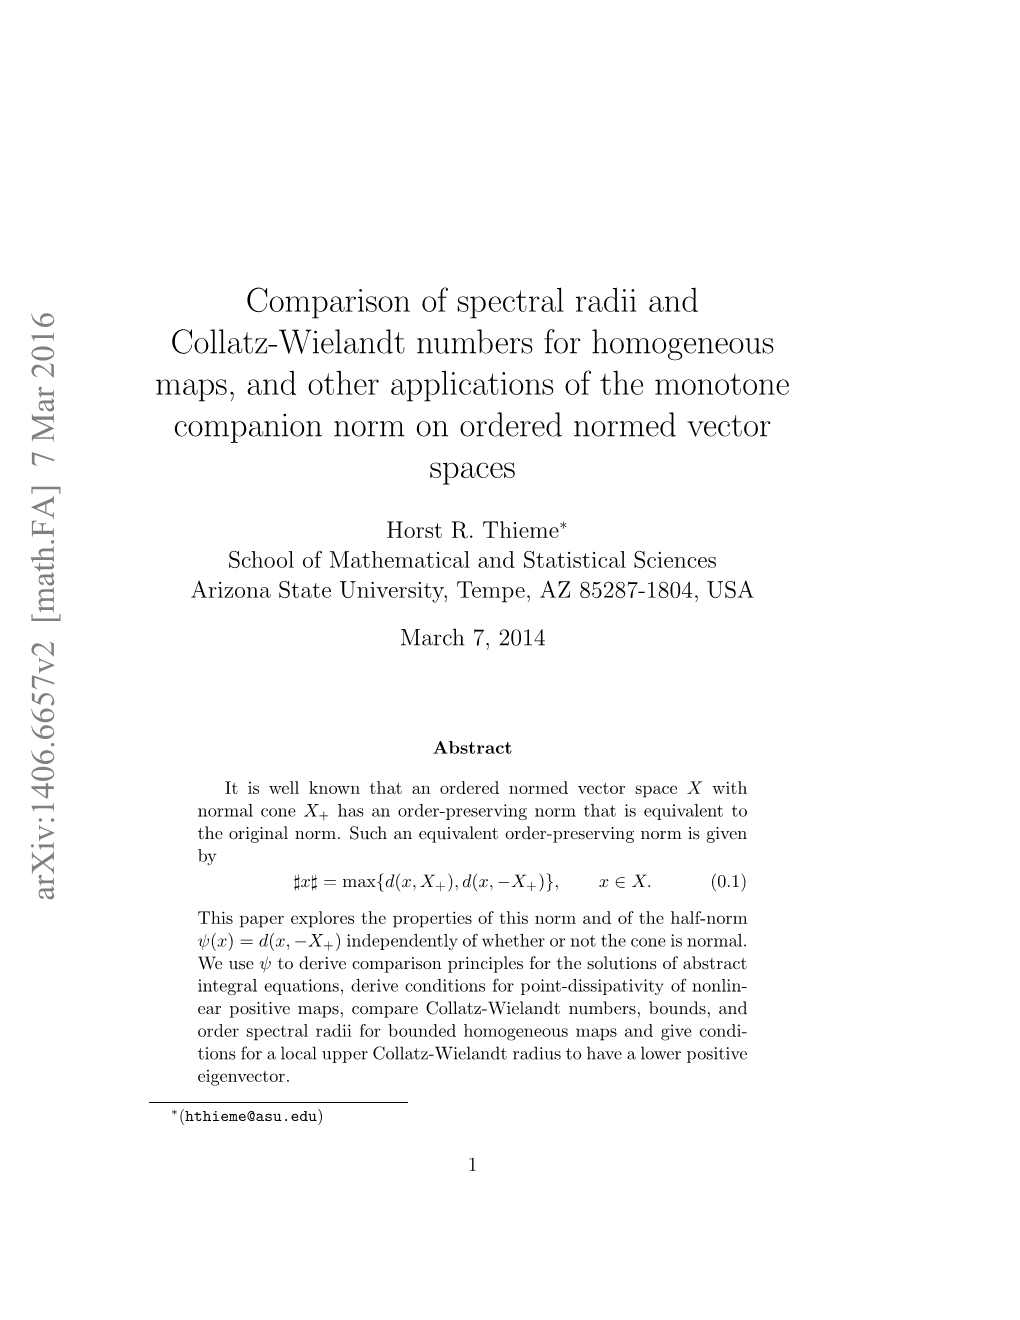 Comparison of Spectral Radii and Collatz-Wielandt Numbers For